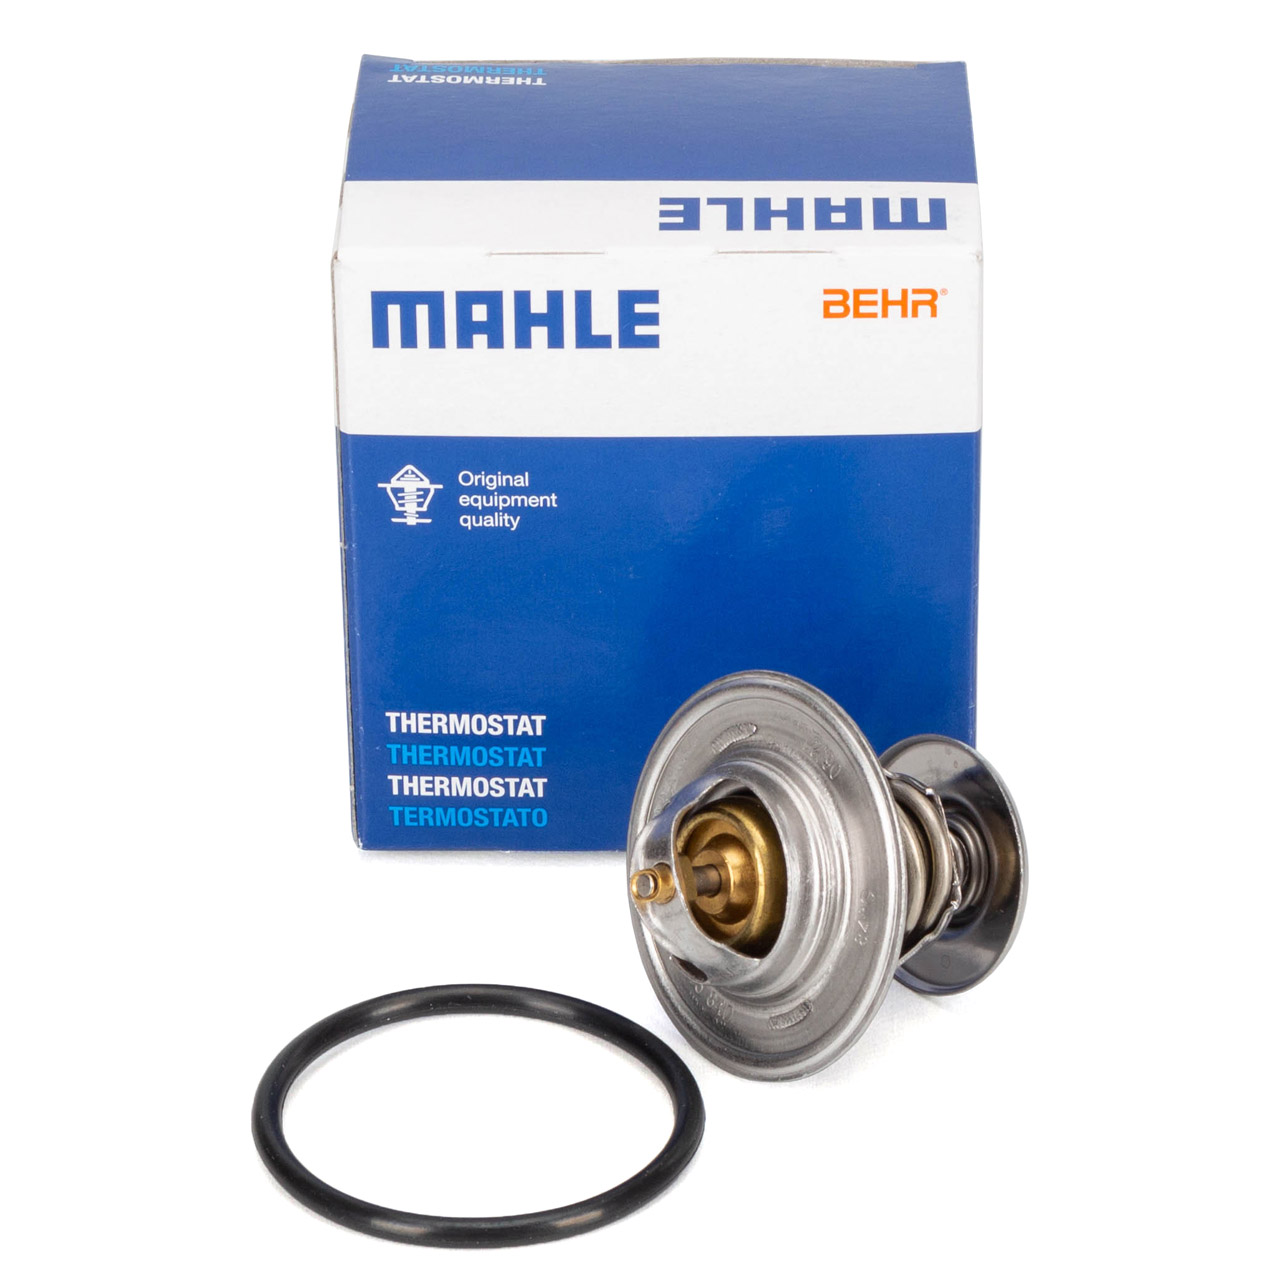 BEHR / MAHLE TX1584D Thermostat + Dichtung VW Golf 1 2 3 Polo T3 T4 Arosa Ibiza 030121113